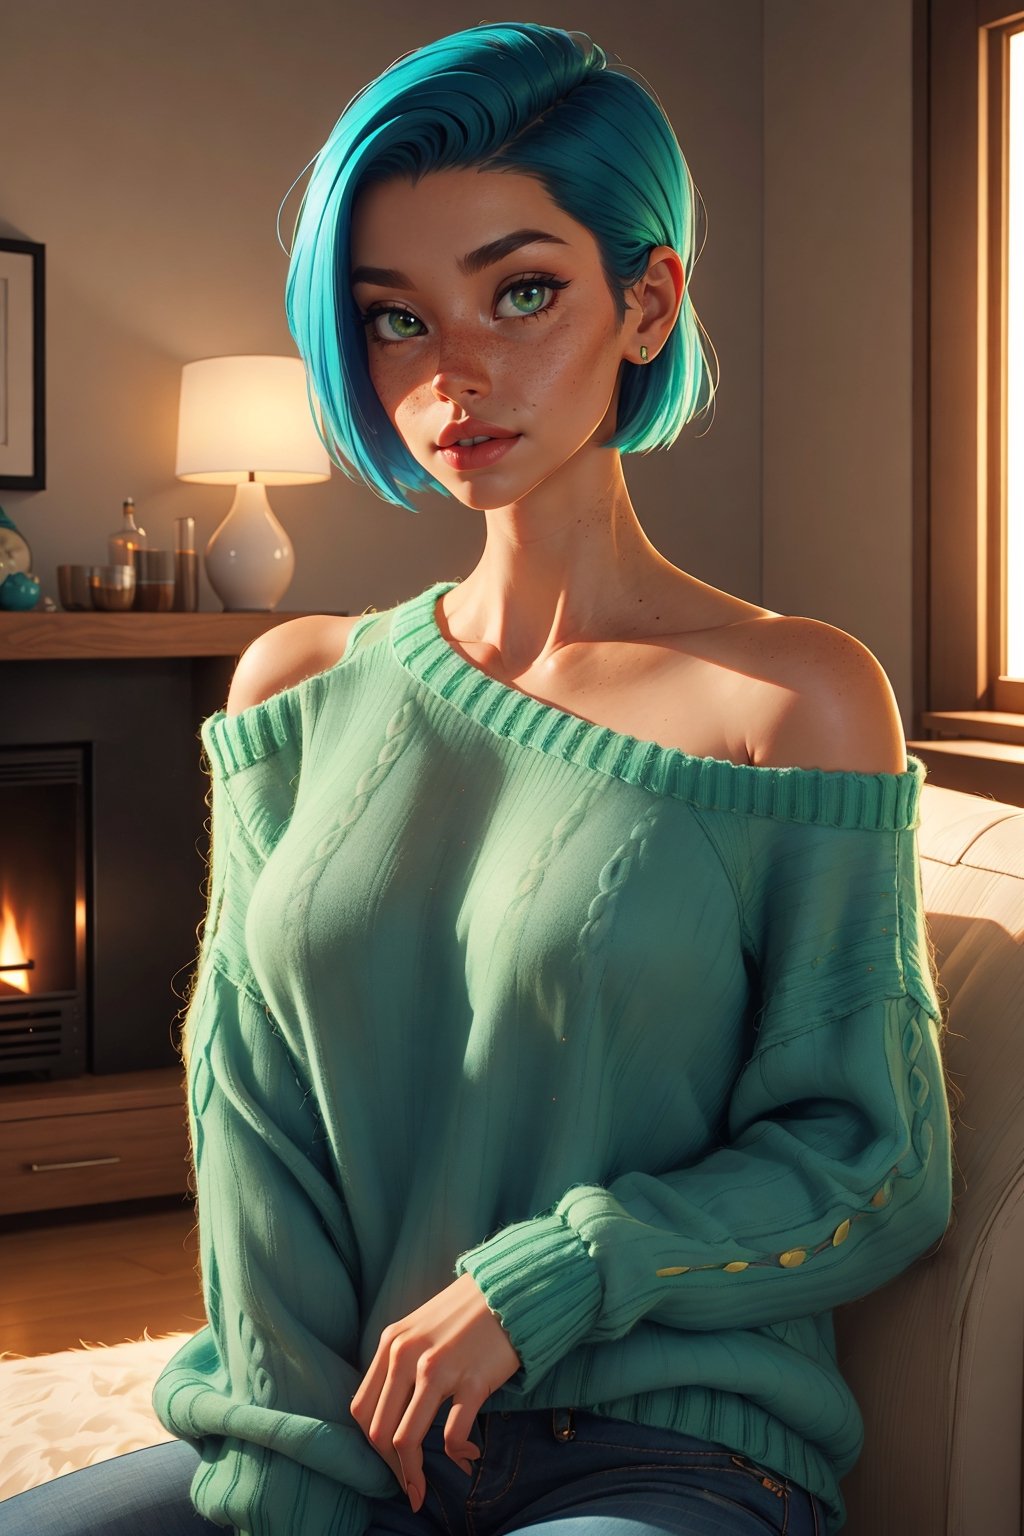 Style: disney, (pixar), 3d, cartoon, realistic, realism, (epic:1.2), trending on artstation, (high quality:1.2), (masterpiece:1.2) , (8k resolution) , high details, incredibly absurdres, color connection, colorized, colorful, sexy, nsfw, seductive),
(1girl mid twenty, latina face, freckles, (blue short hair), shaved sides, medium breasts, tattooed,  sw3ater, (green sweater:1.22), off-shoulder sweater, fuzzy sweater,
(Backround: cozy, wholsome, warm, living room)
,realistic illumination